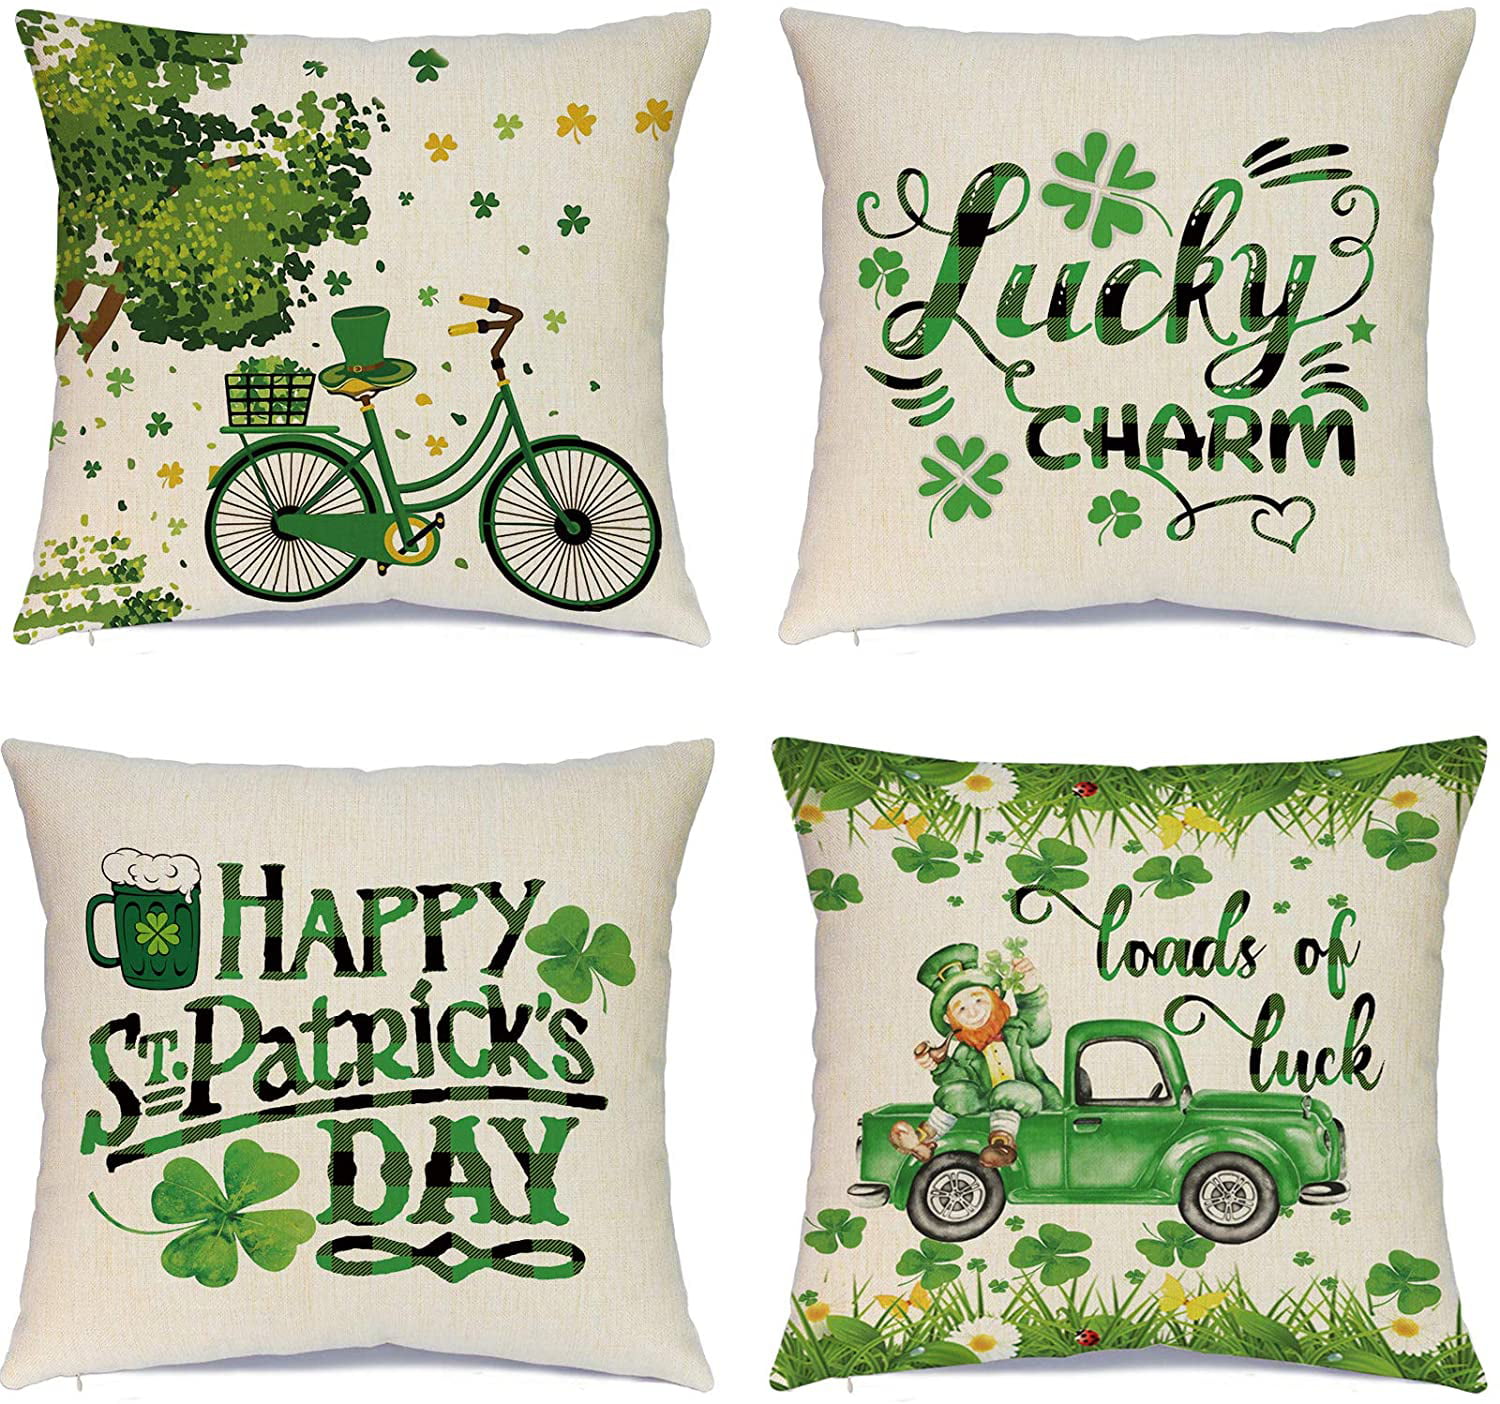 AVOIN colorlife St Patrick's Day Watercolor Lucky Clover Throw Pillow Cover 18 x 18 Inch Shamrock Cushion Case Decoration for Sofa Couch 